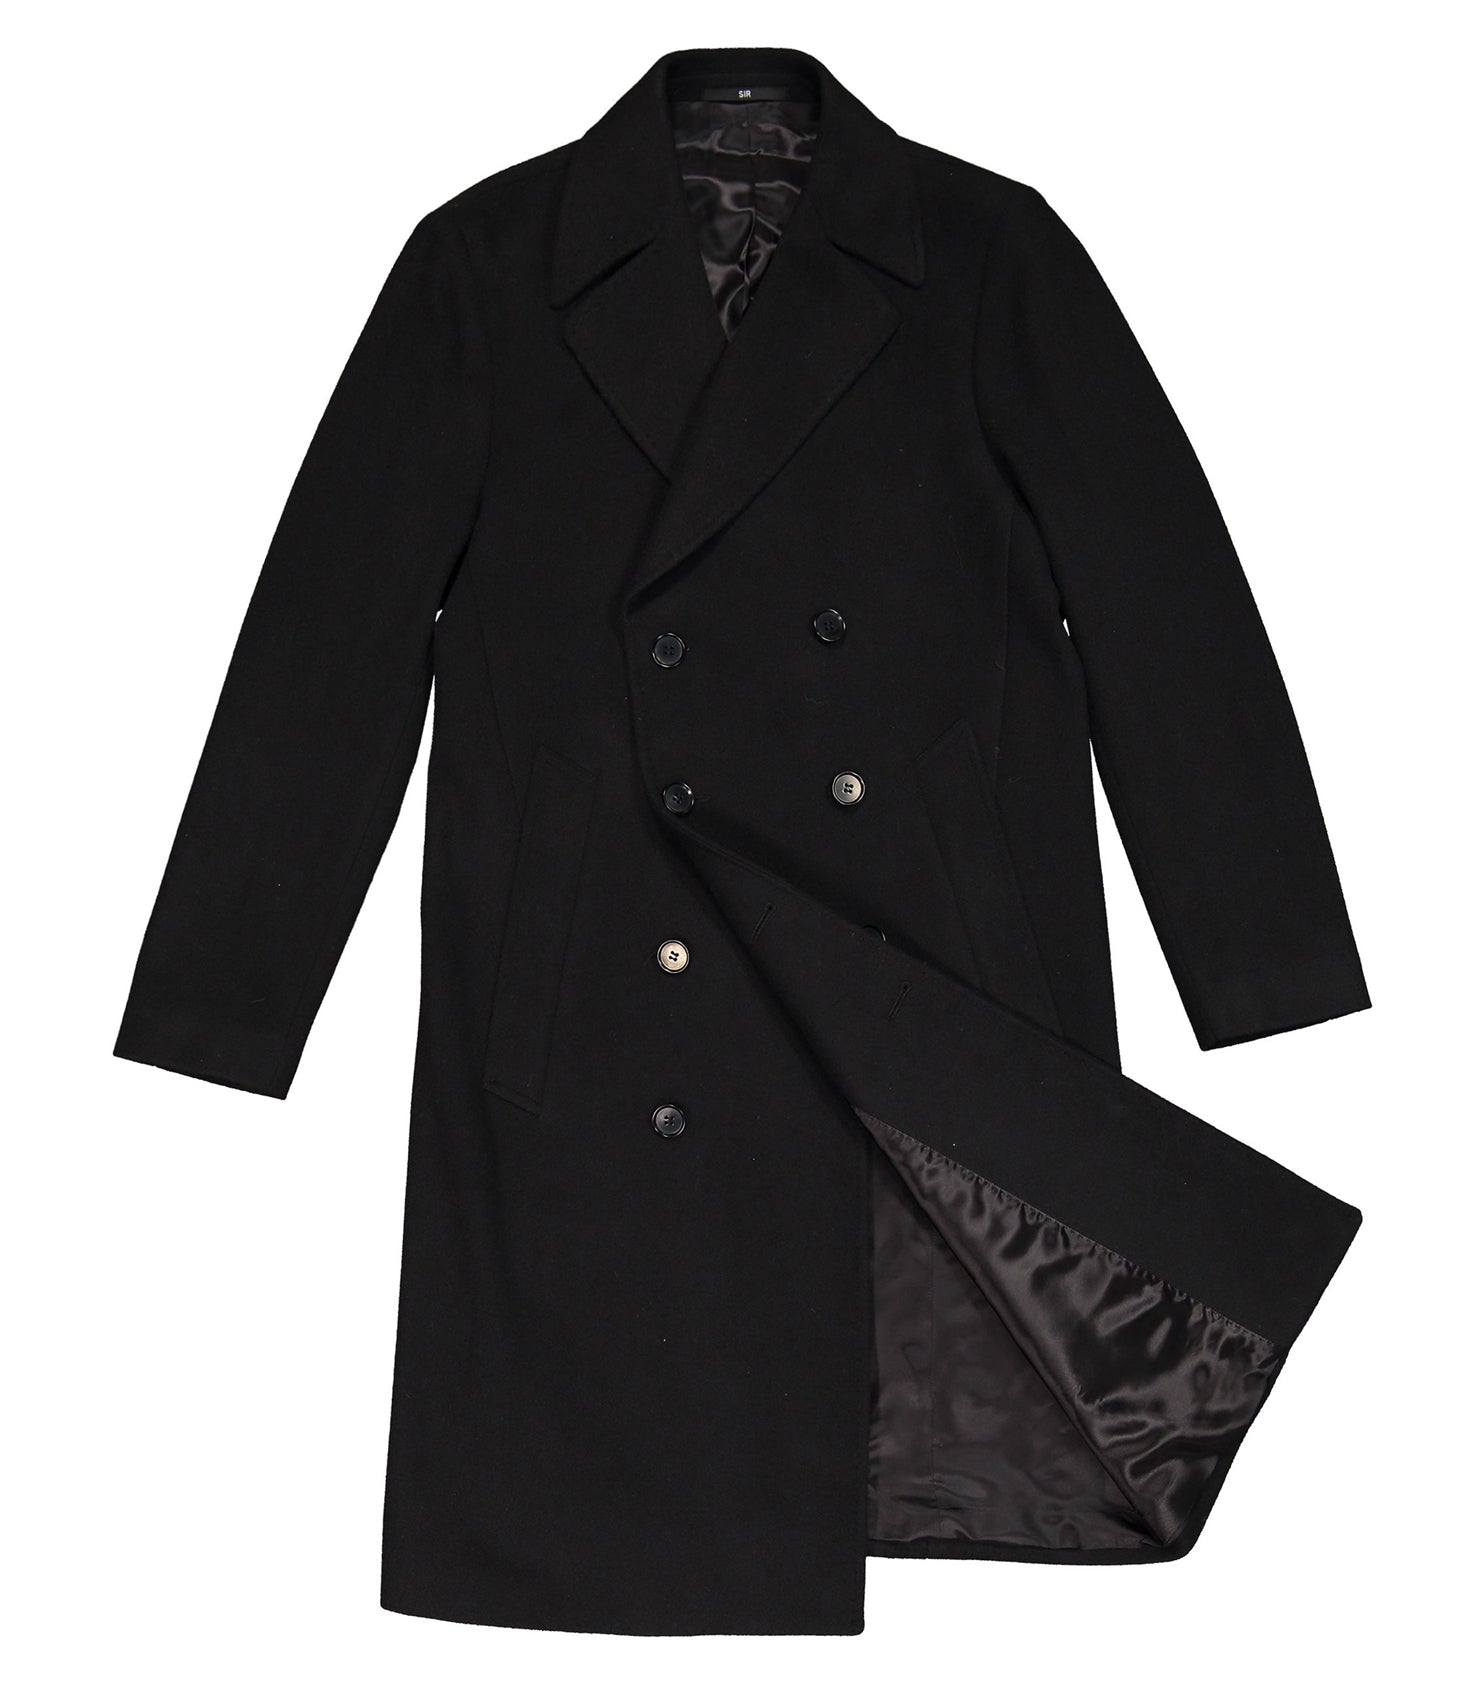 Spectre Black Double-Breasted Coat